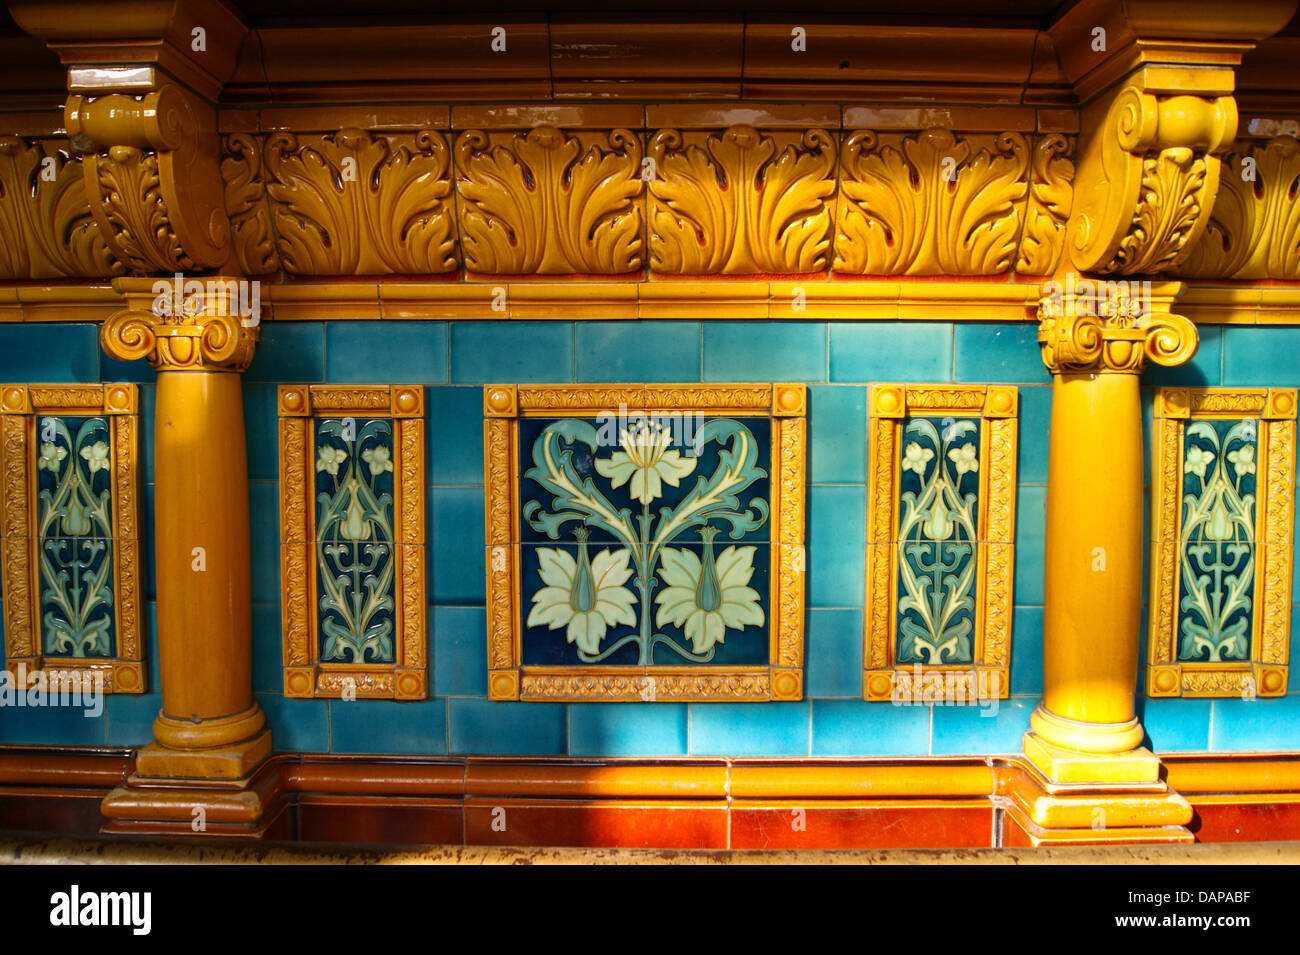 Tiled acanthus design bar interior of the Waterloo Hotel (1870), Newport, Cas Newydd, Wales Stock Photo